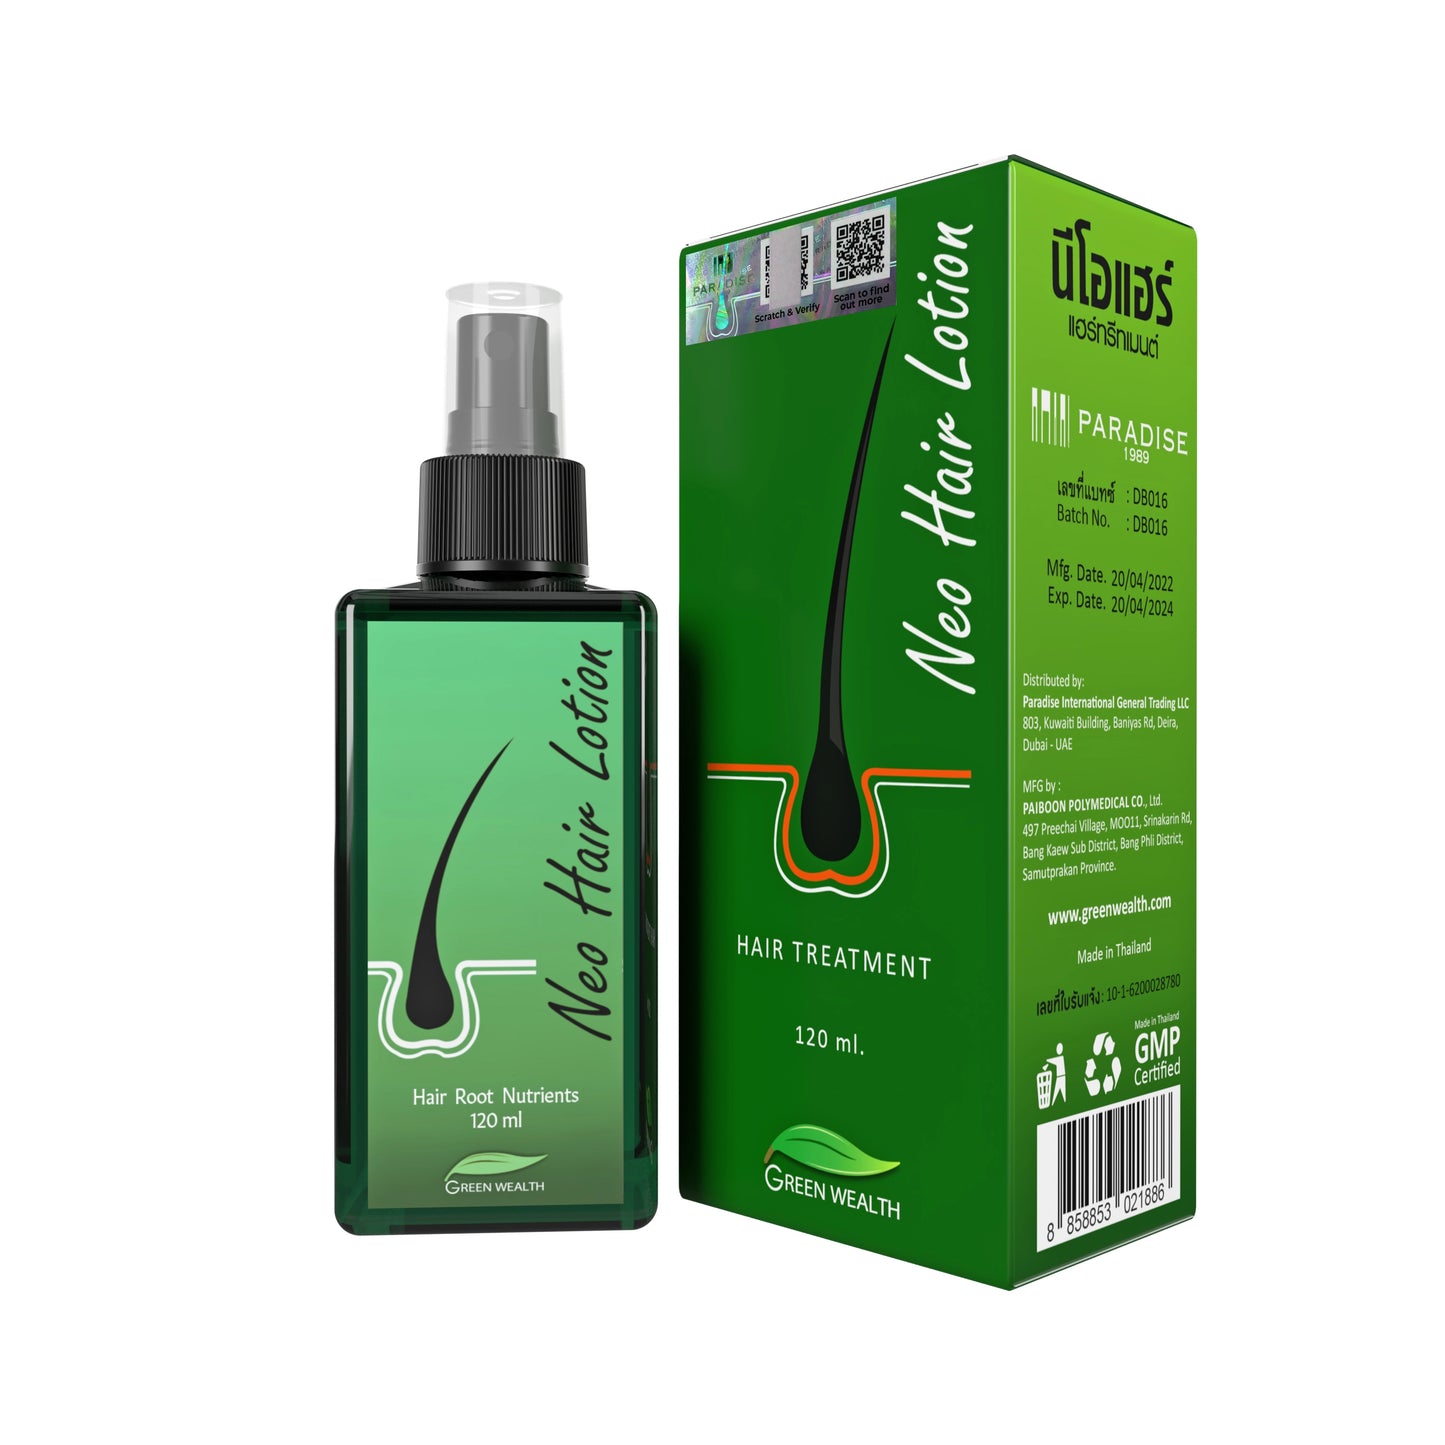 100% Original Made In Thailand Neo Hair Lotion with Derma Roller, Hair Treatment and Root Nutrients 120ml